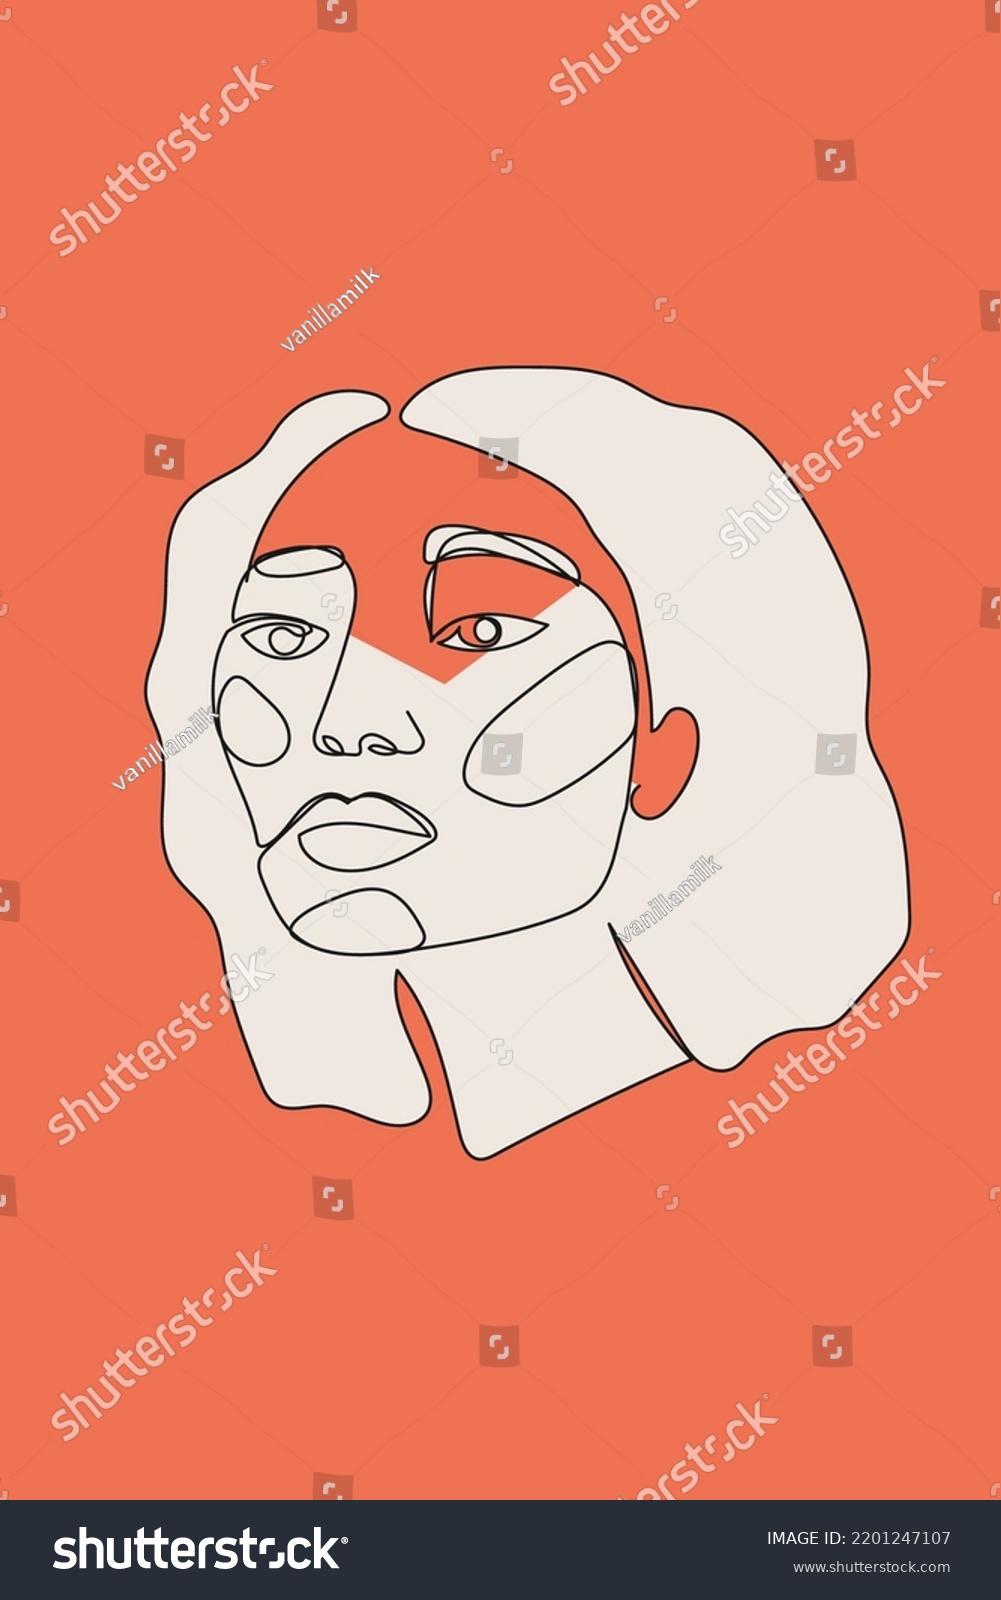 Abstract Beauty Woman Female Line Art Stock Vector Royalty Free Shutterstock